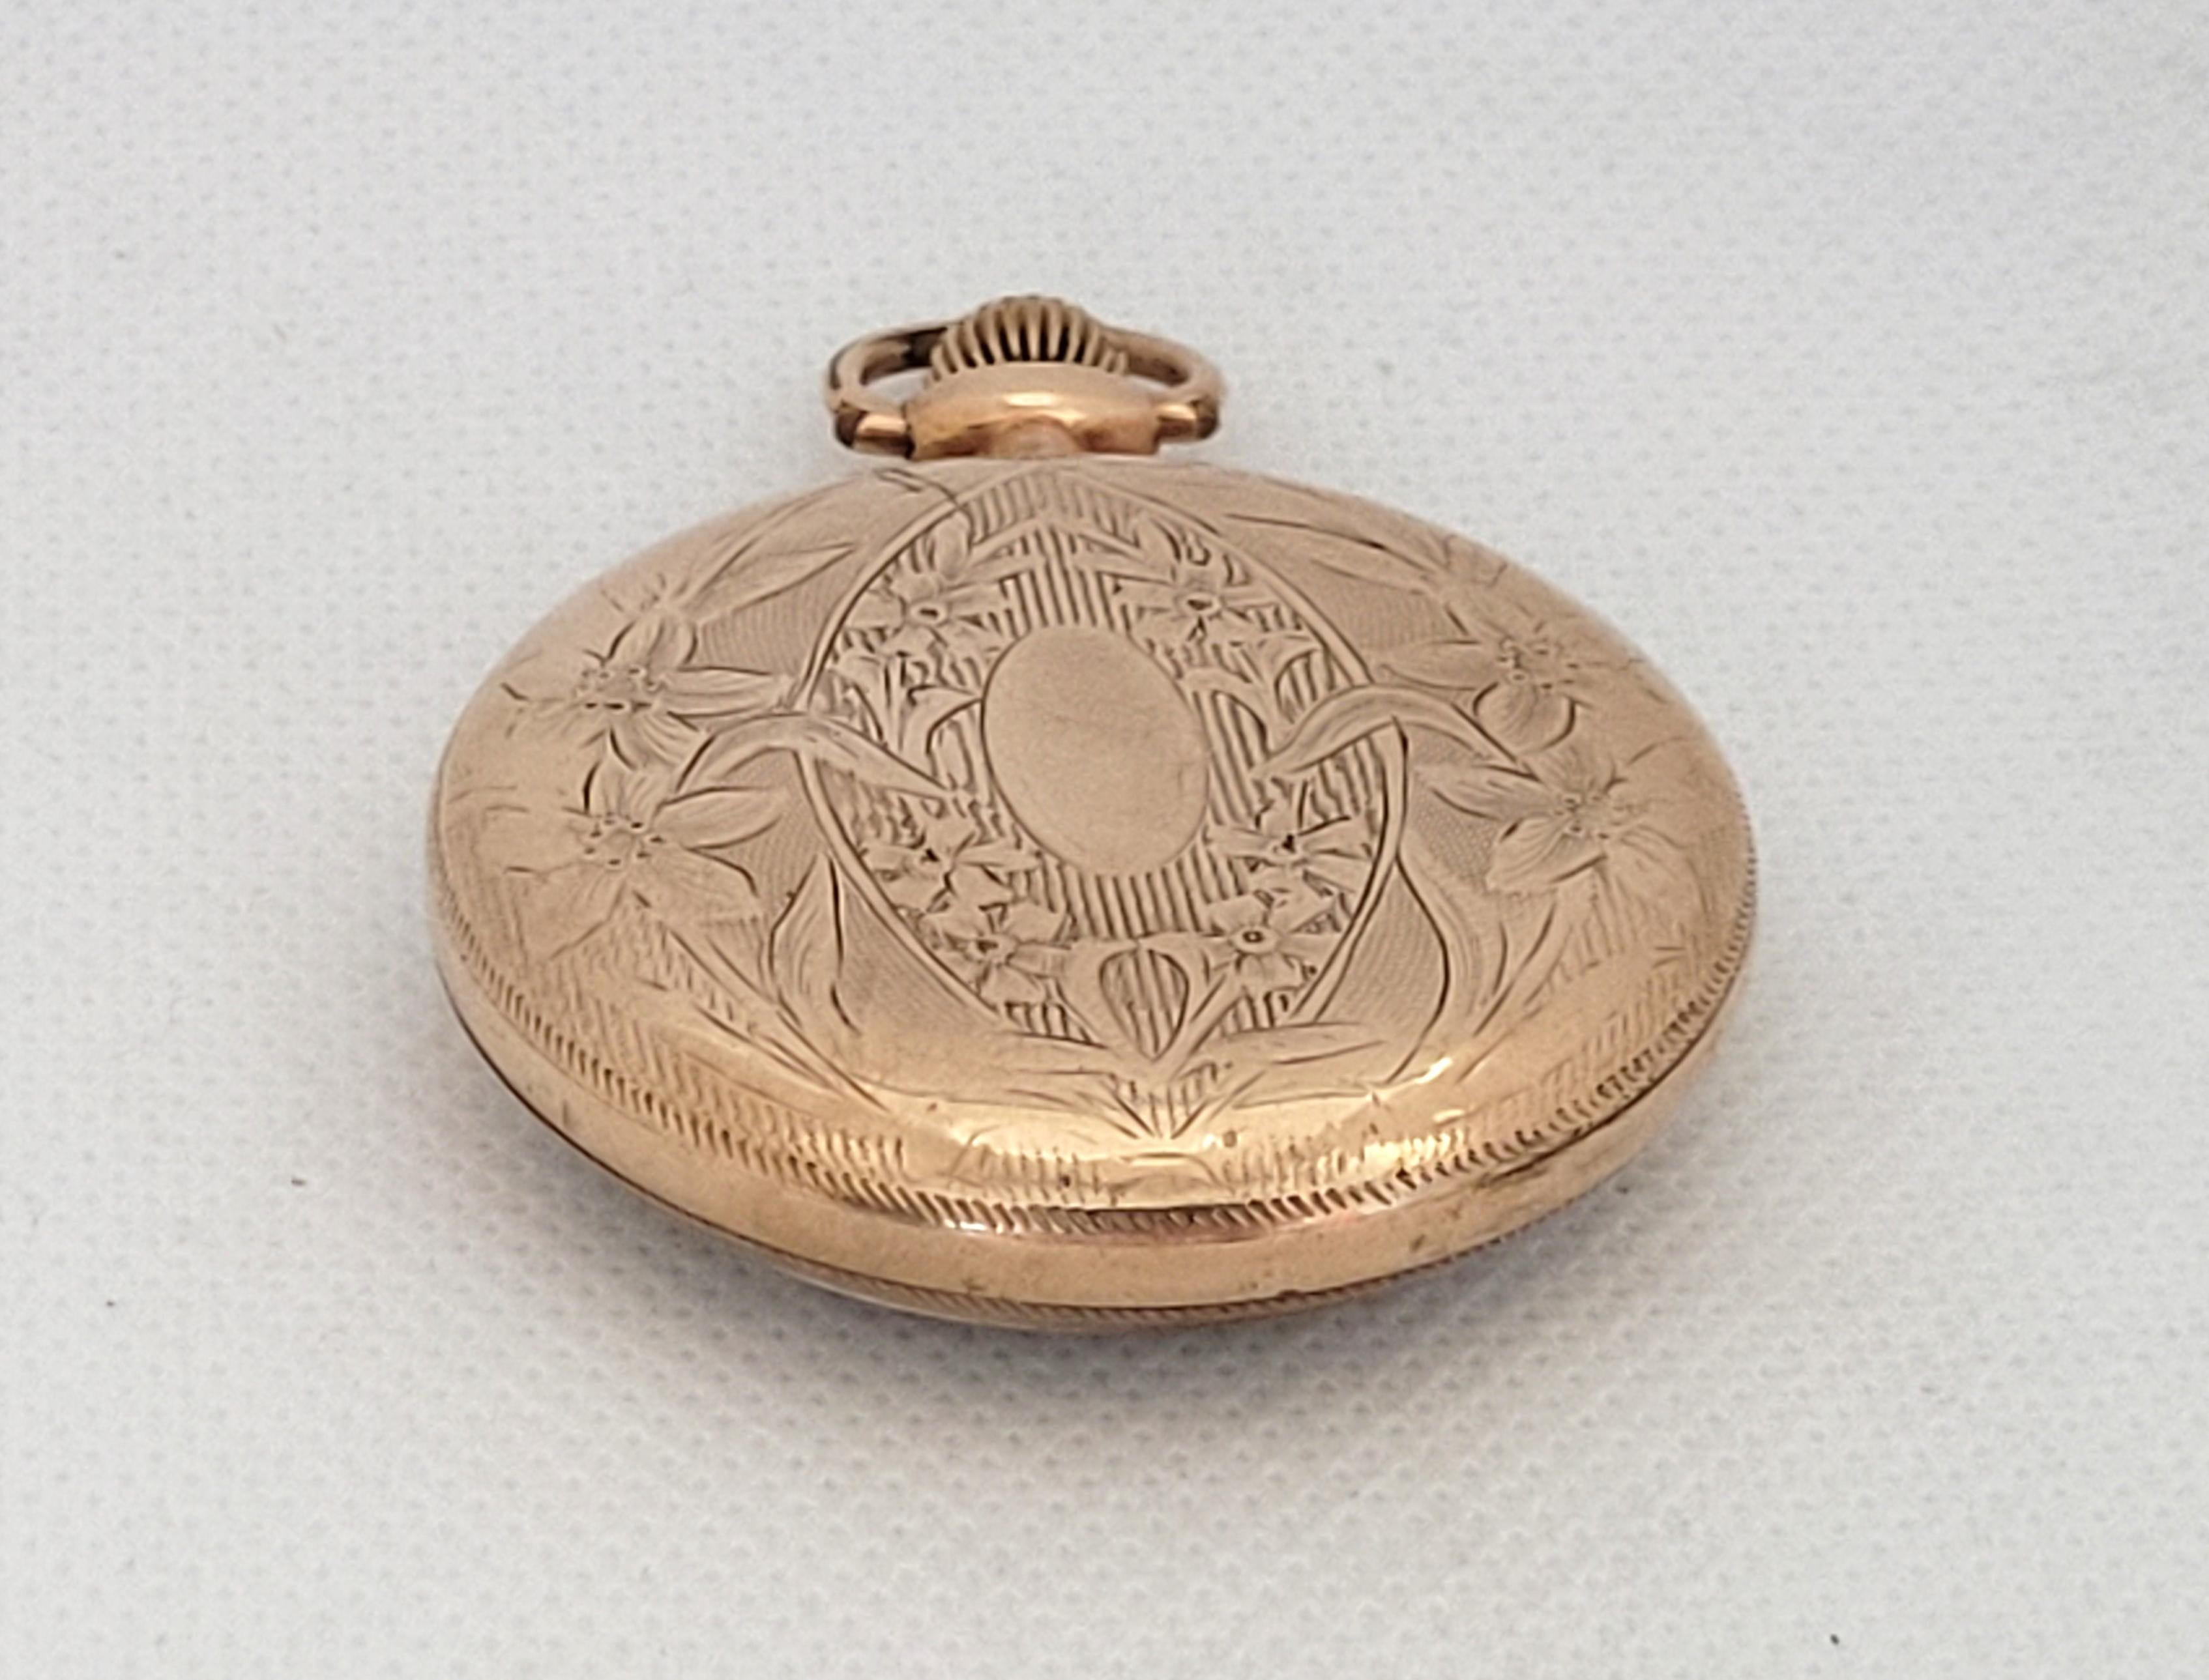 Elgin 1911  gold plated pocket watch with a 44mm case that is 11mm thick and a clean plastic crystal accented with a beautiful floral design. The 17 Jewel manual movement is working, serial number 15612909. Overall, this watch is in very good